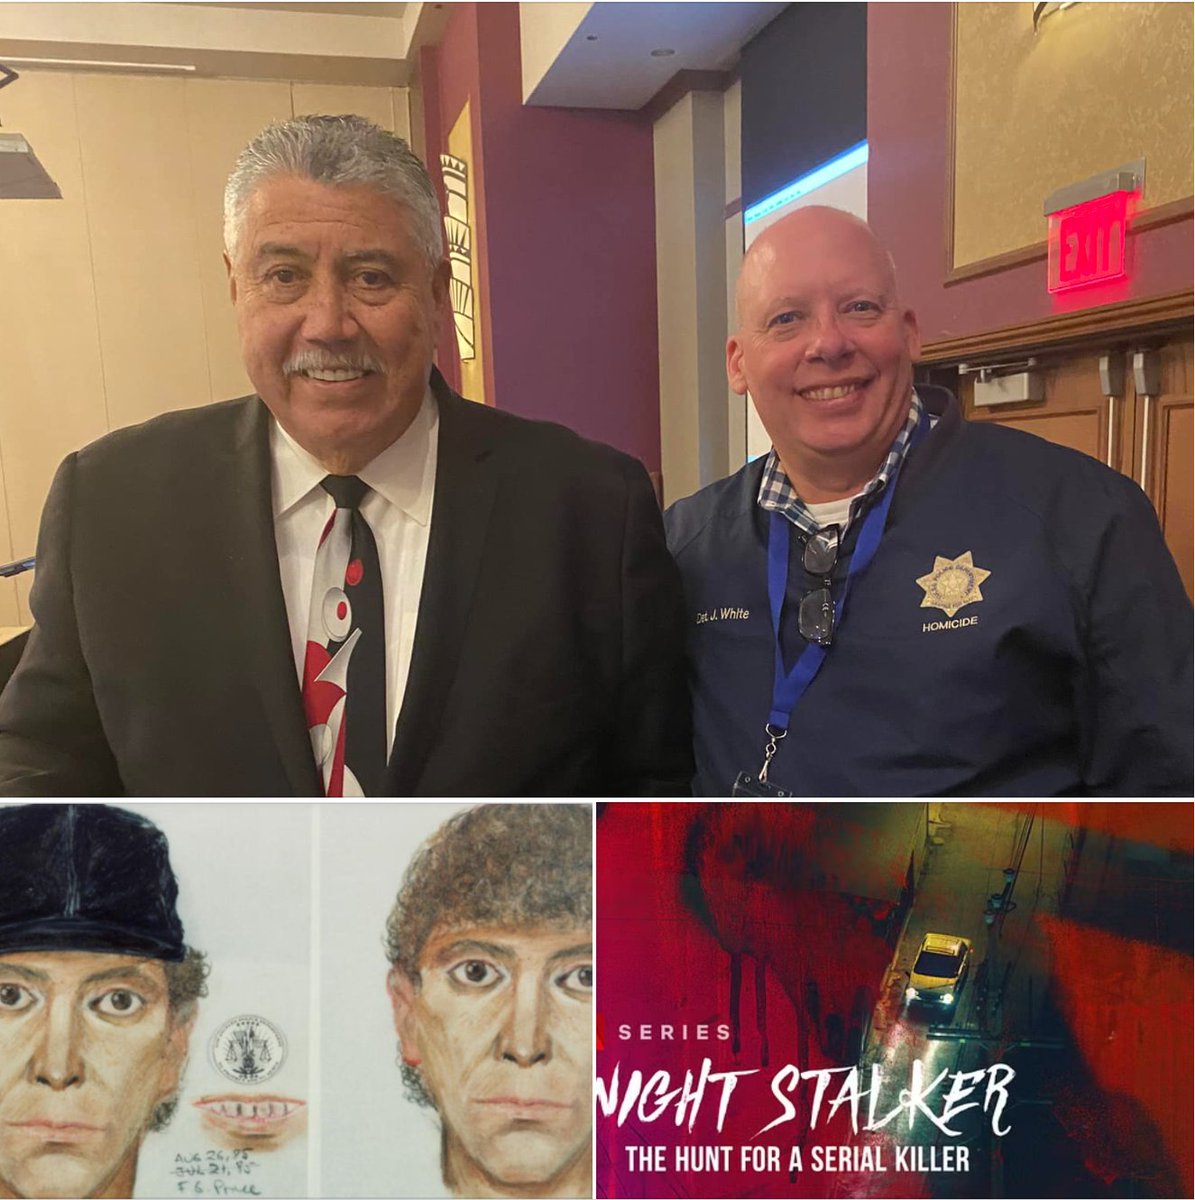 Tomorrow night, 7 pm CST, on KGRA Digital Broadcasting will be an interesting time with Retired Det. Gil Carrillo from LA County Sheriffs Office Homicide Bureau. He is a friend and we will discuss the Night Stalker case, etc.... Legend!!! #KGRA-db#homicideinvestigation